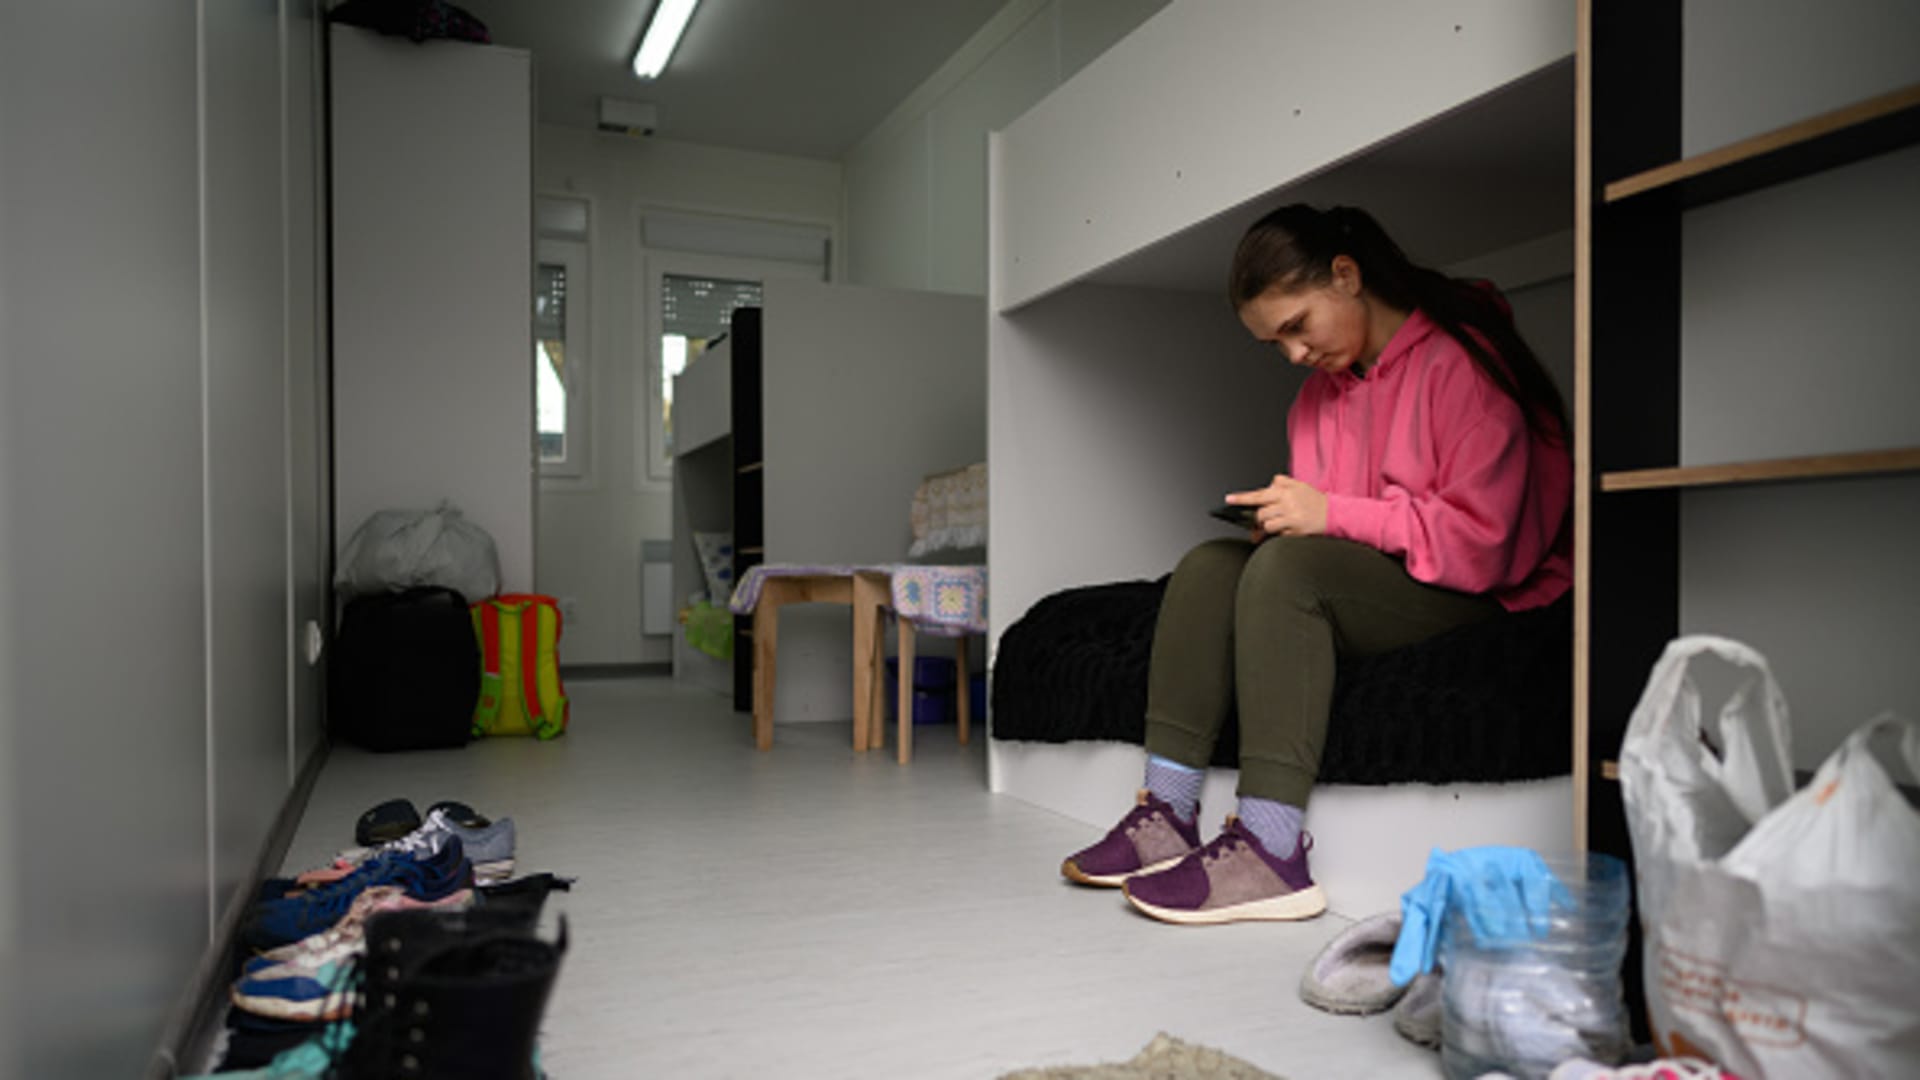 Albina Nagorna, aged 16, reads a book on her mobile phone in her family's temporary home in a converted shipping container on April 26, 2022 in Lviv, Ukraine.